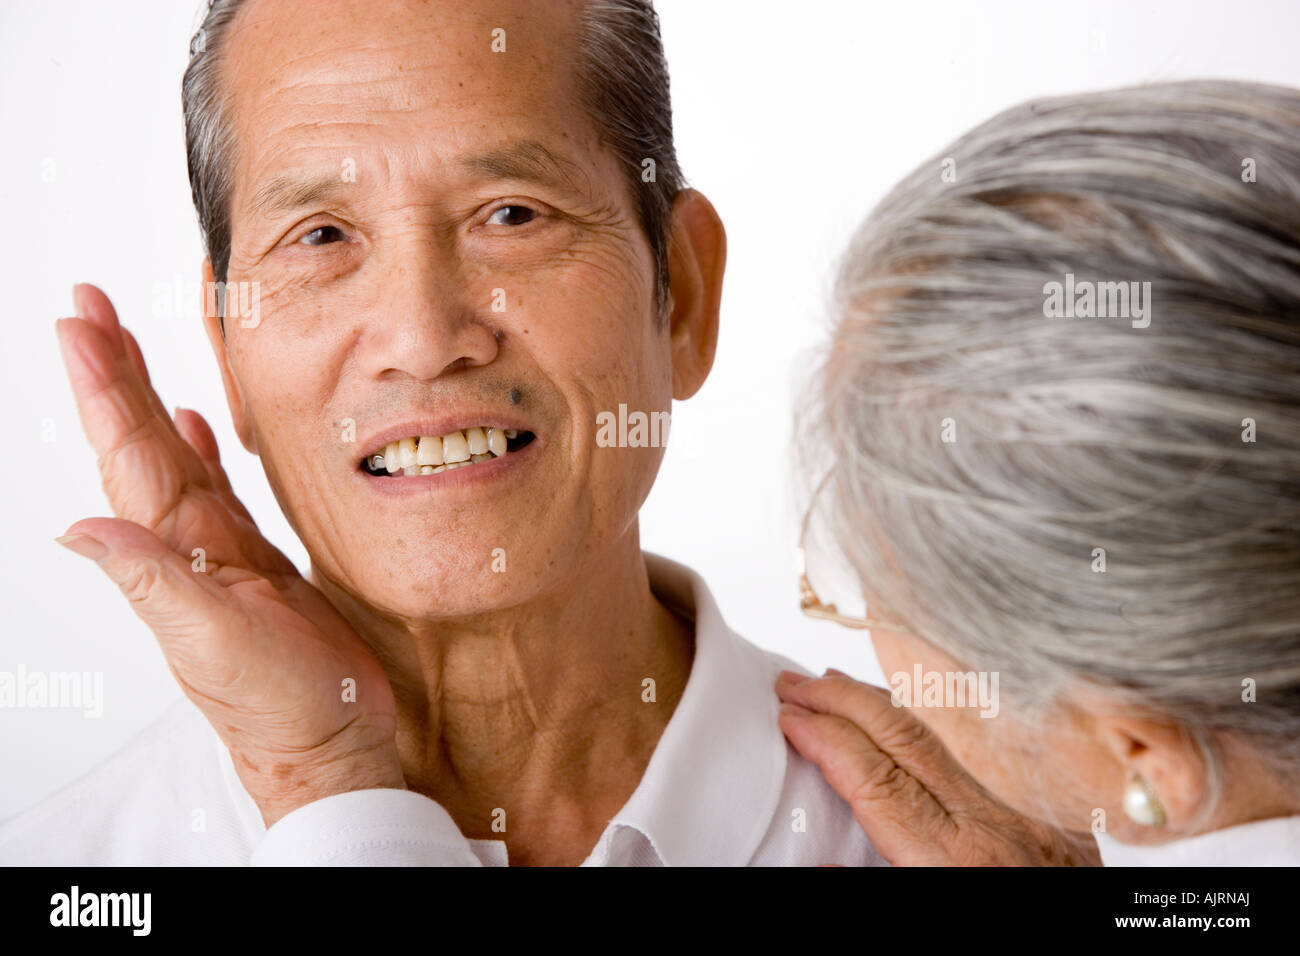 Hand Woman Touch Body Her Couplefeeling Stock Photo 1616936800